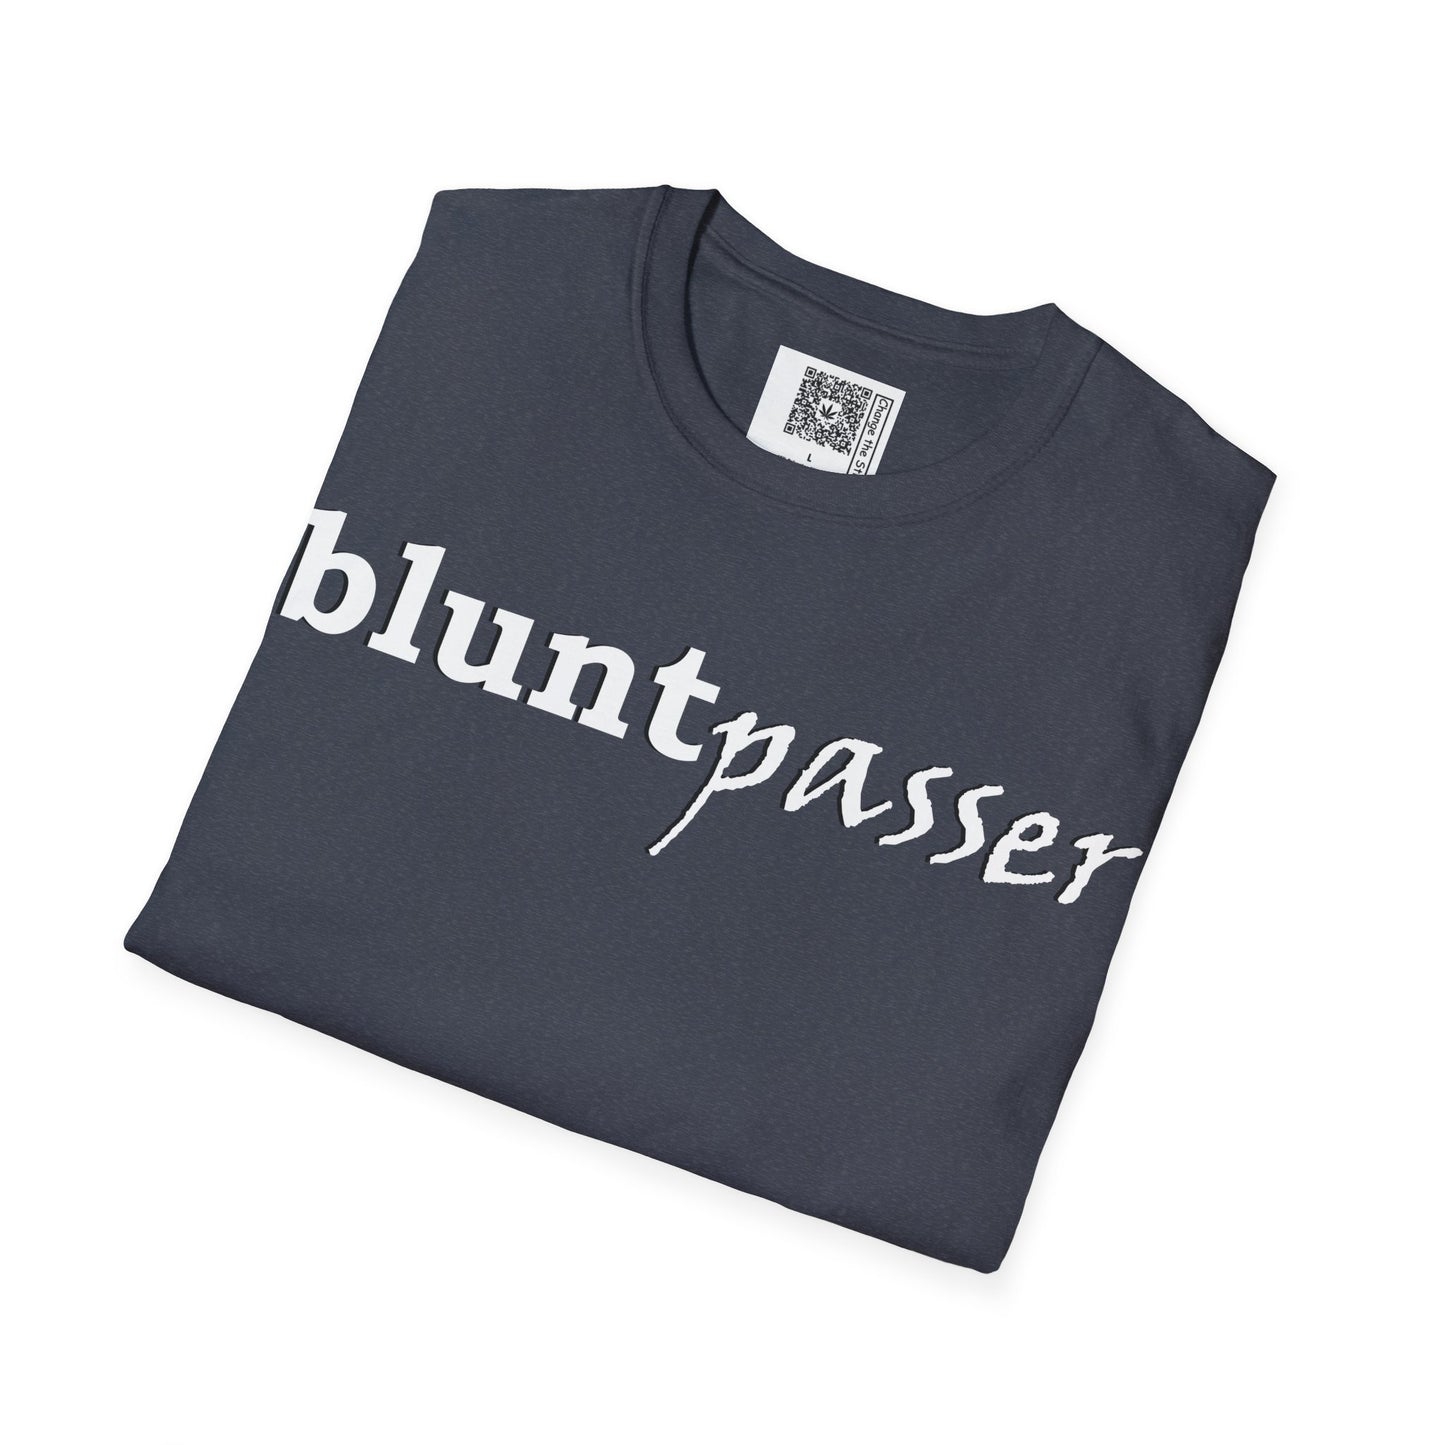 Change the Stigma, Heather Navy color, shirt saying "blunt passer", Folded, Qr code is shown